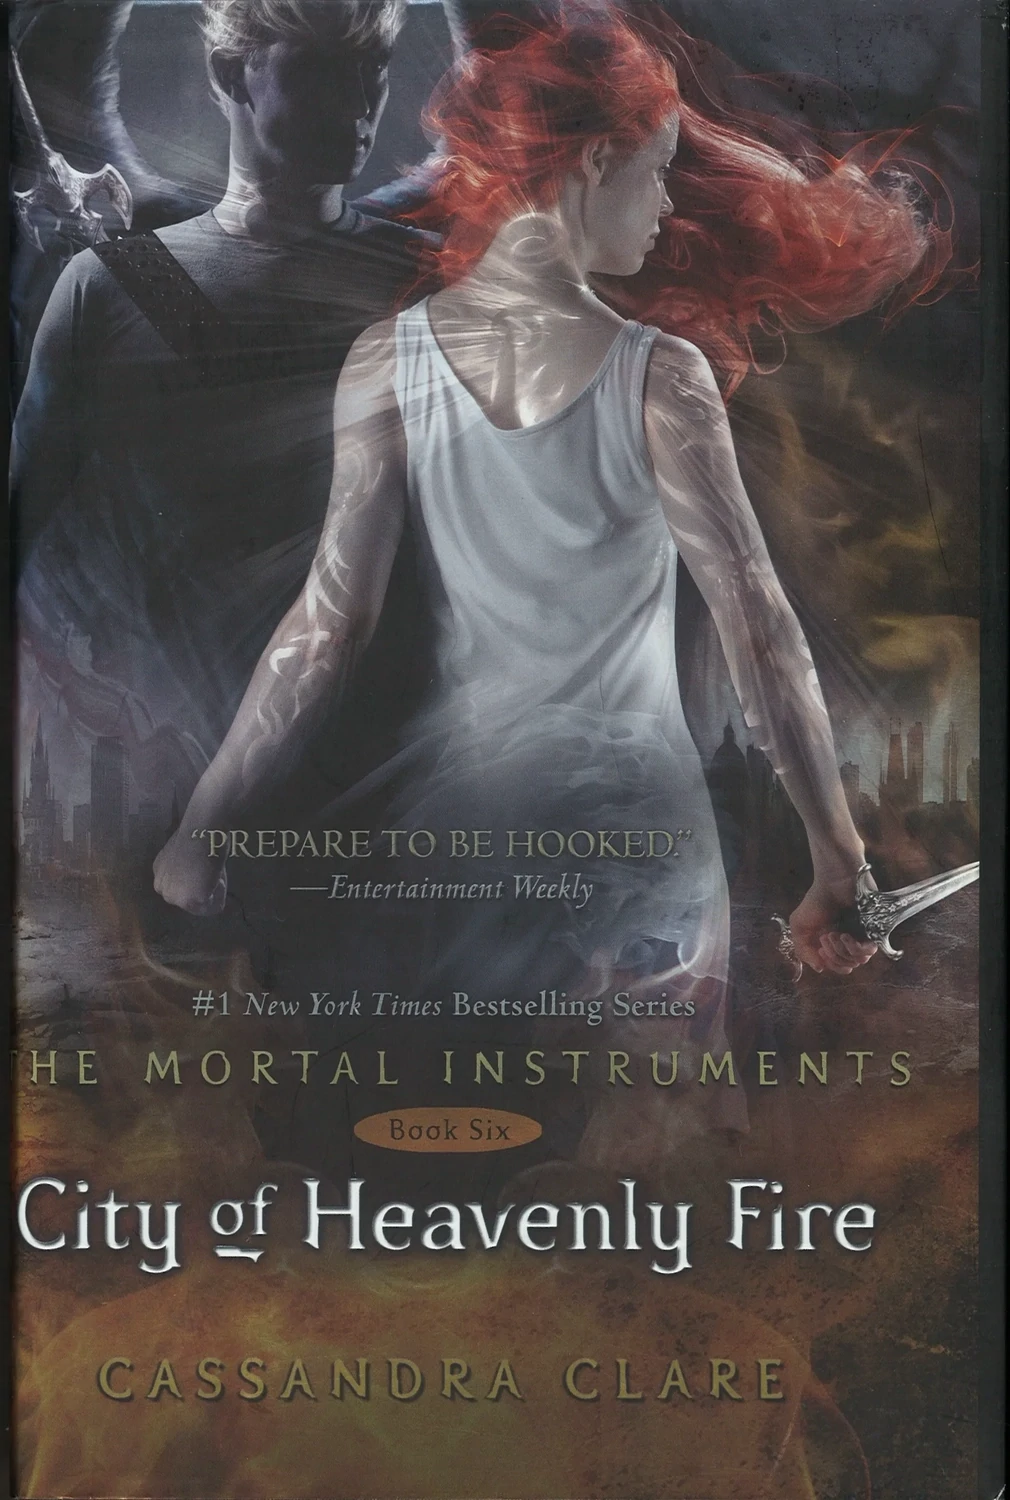 City of Heavenly Fire (Mortal Instruments, Book 6)